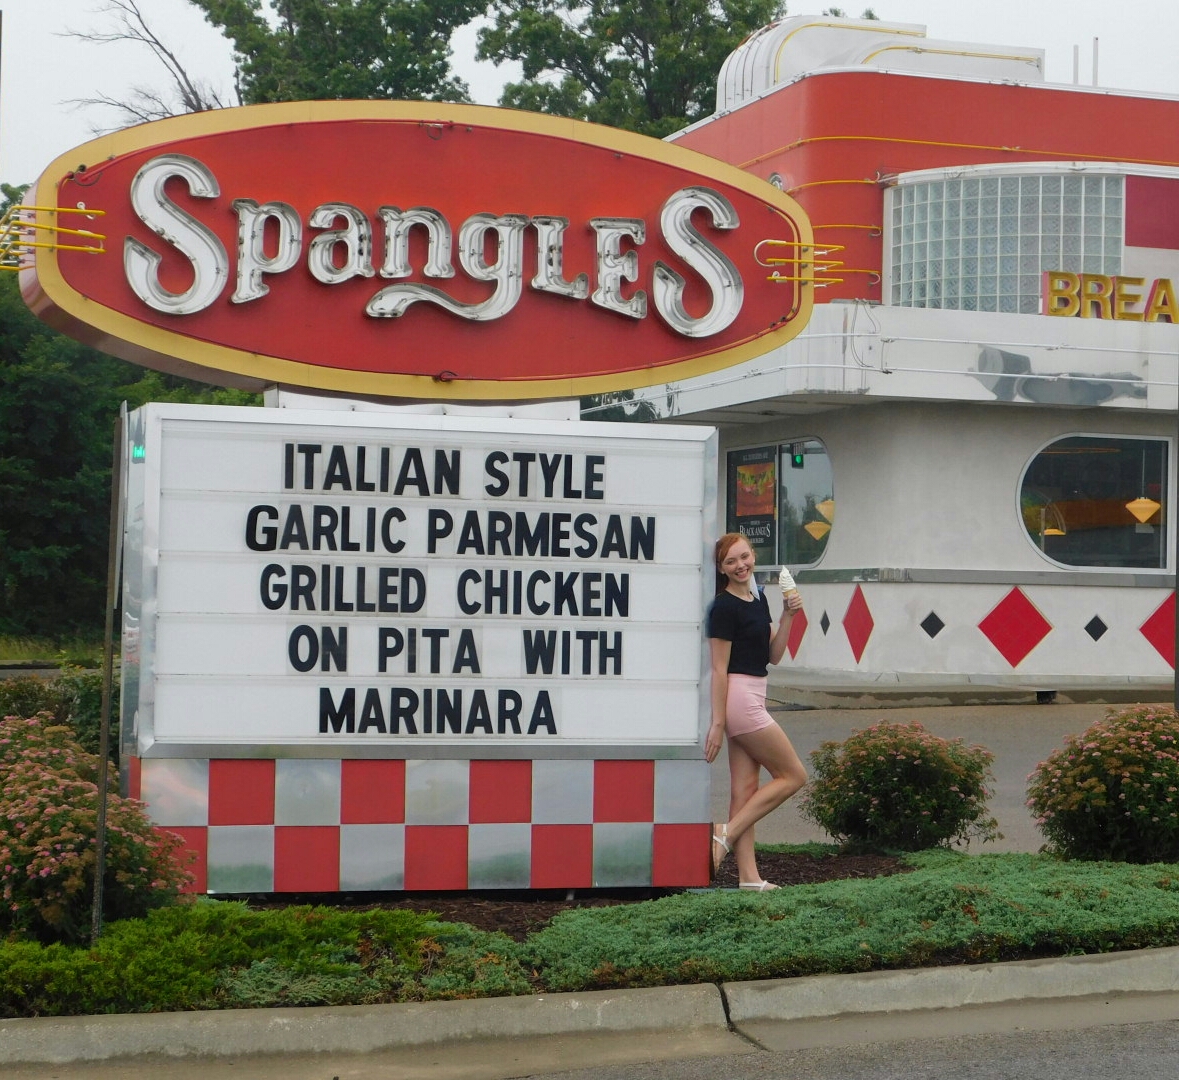 Spangles, Wanamaker Road. Founded in 1978, Spangles incorporates elements such as neon, bold colors, and the geometric juxtaposition. The particular restaurant was probably built around 2005, yet its heart is mid-century.